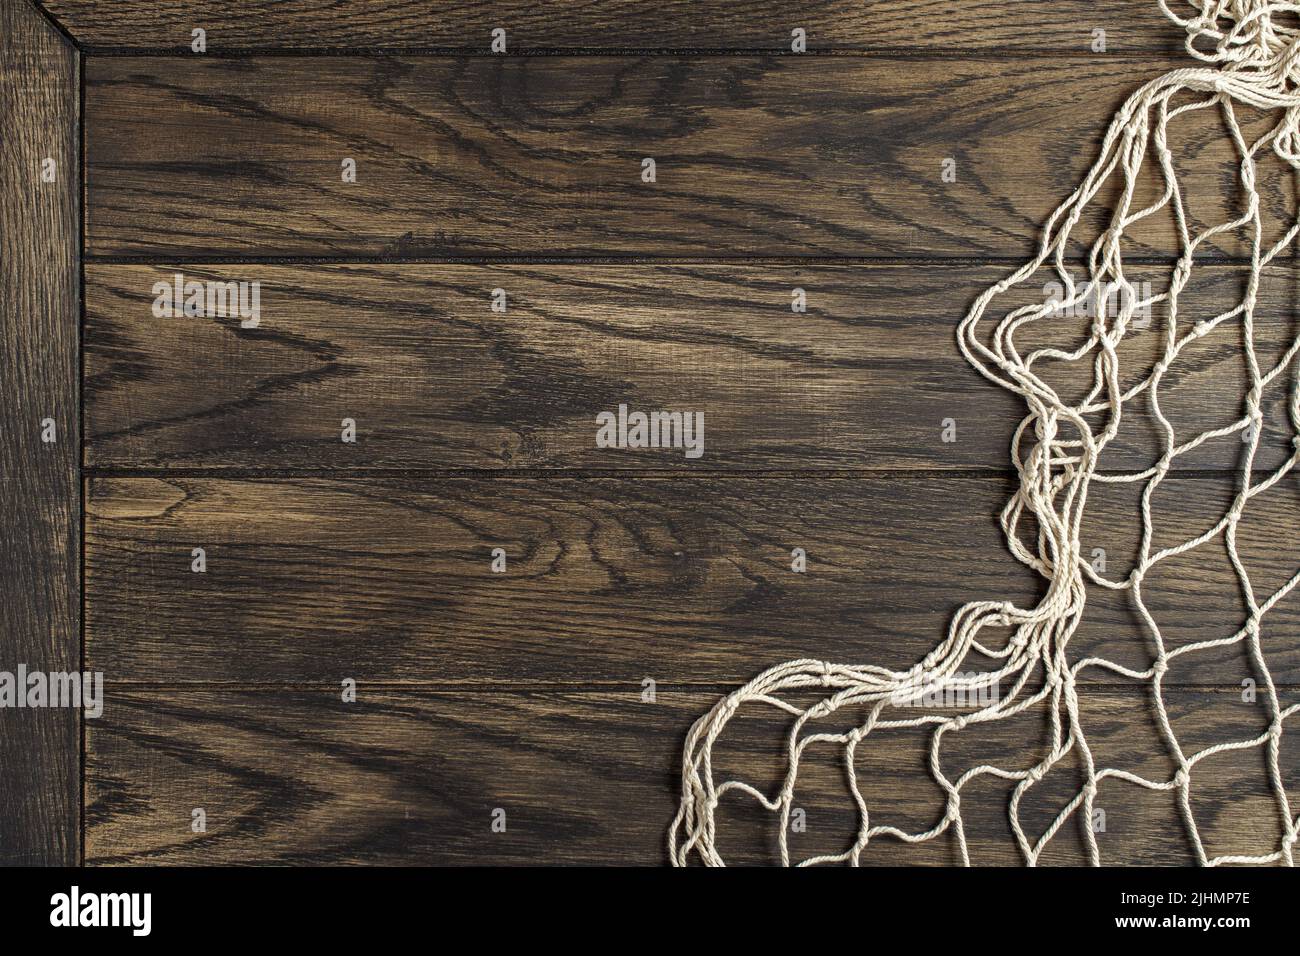 Fishing net on old oak board background with copy space Stock Photo